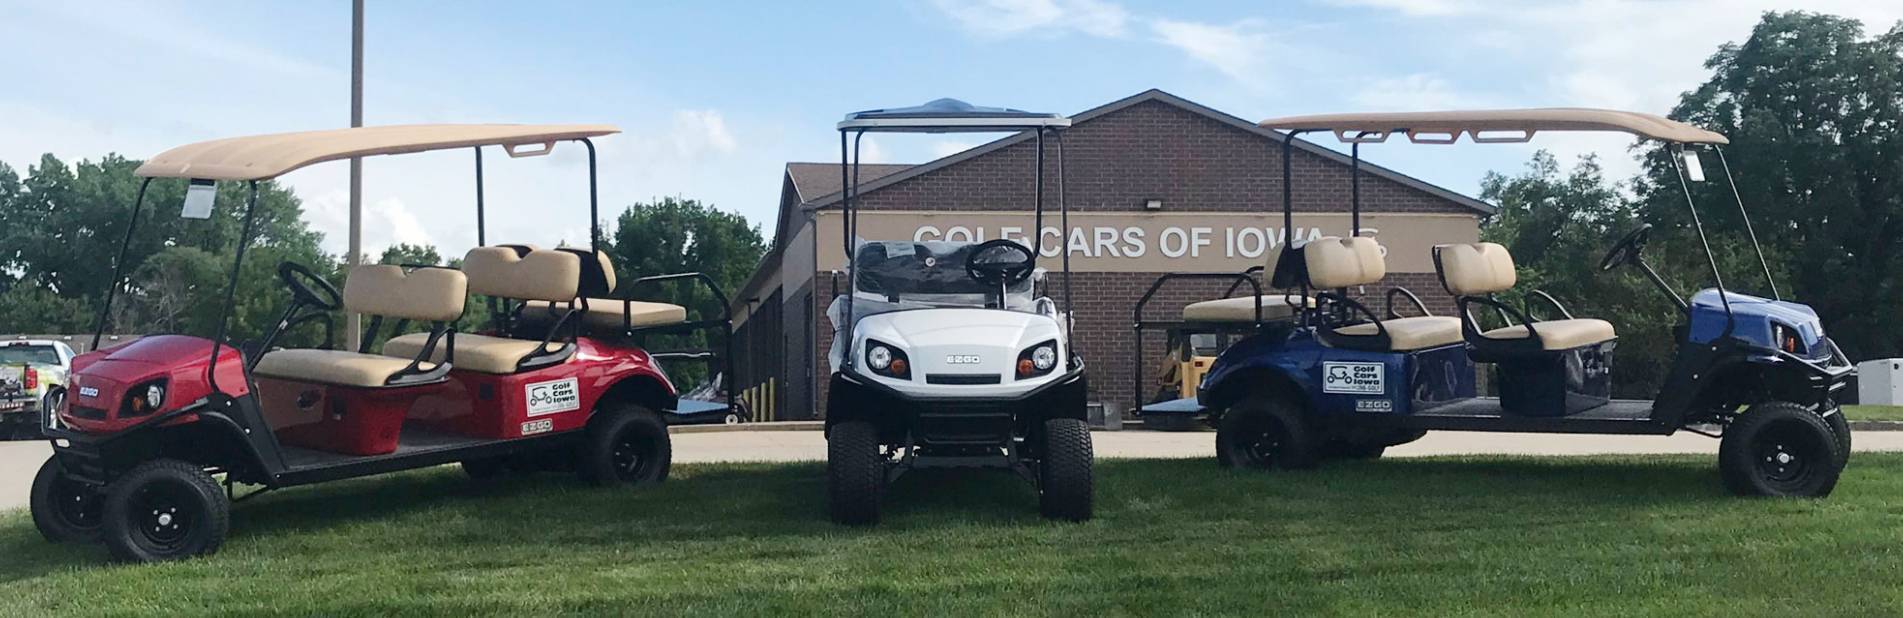 Golf Cars of Iowa - New & Used golf car Sales, Service, Rentals and Parts  in Pleasant Hill, IA near Des Moines, Adel, Ft. Dodge, New Hampton,  Waterloo, Marshalltown, and Carroll